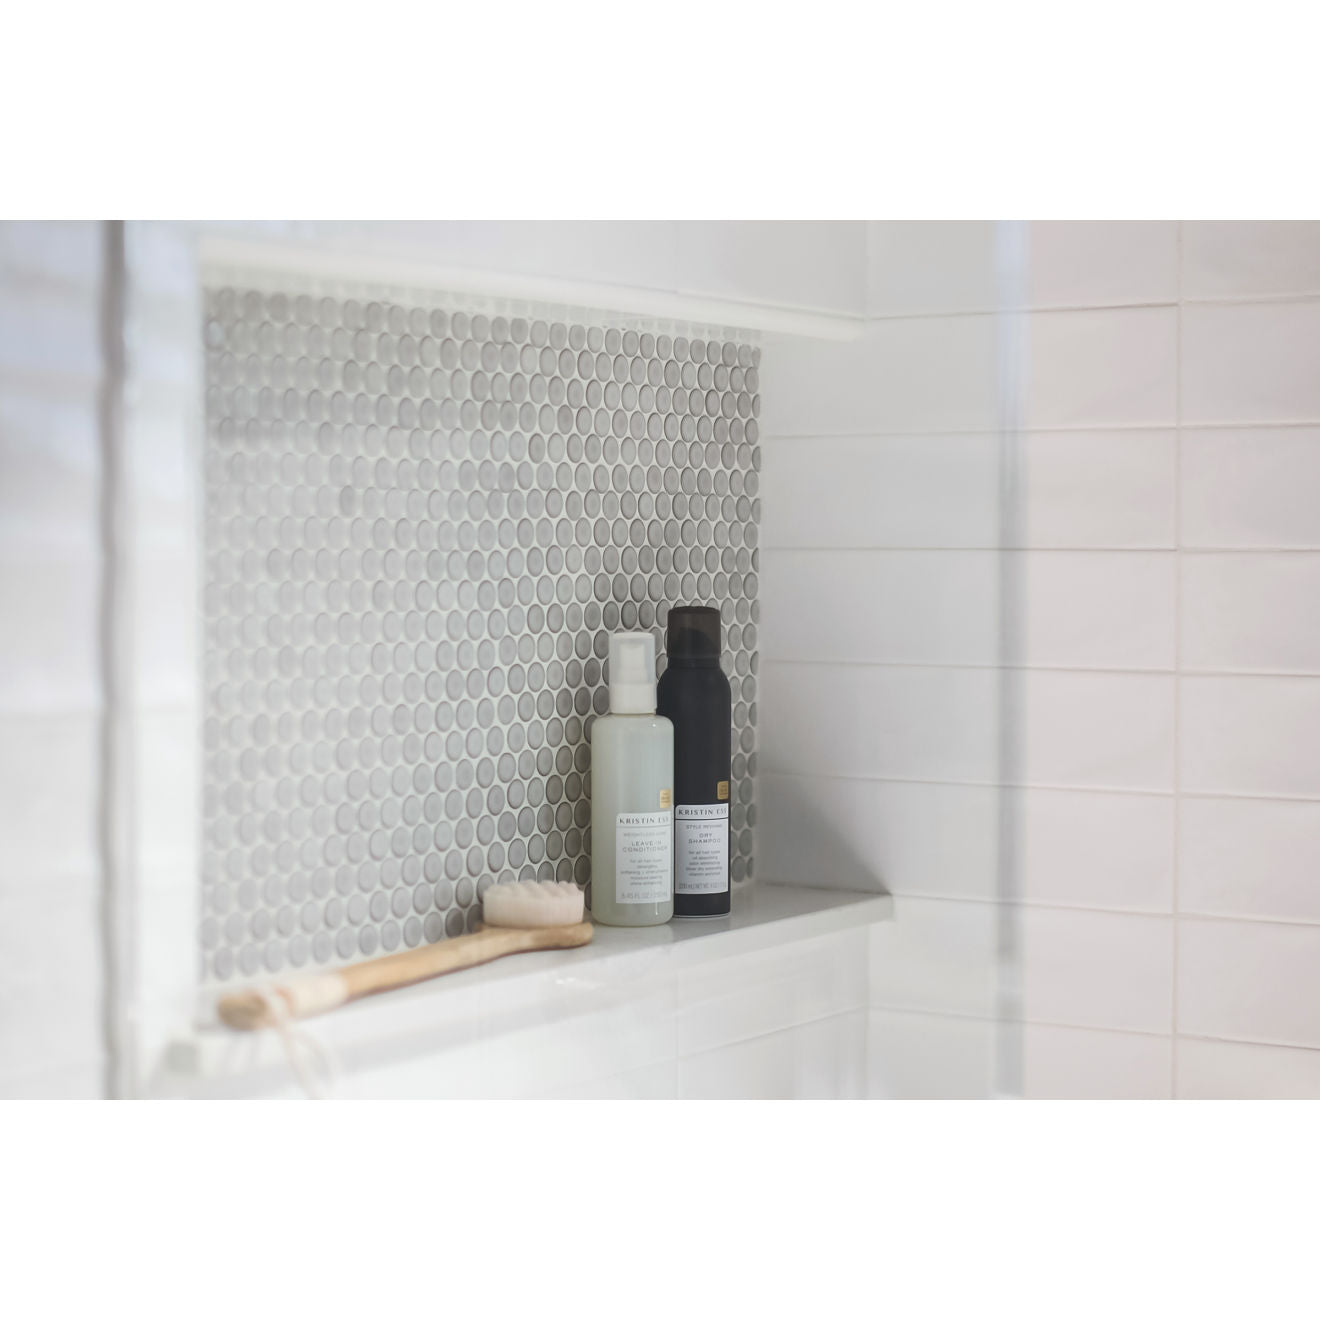 Pumice penny round tile used as a backsplash for a shower alcove. 